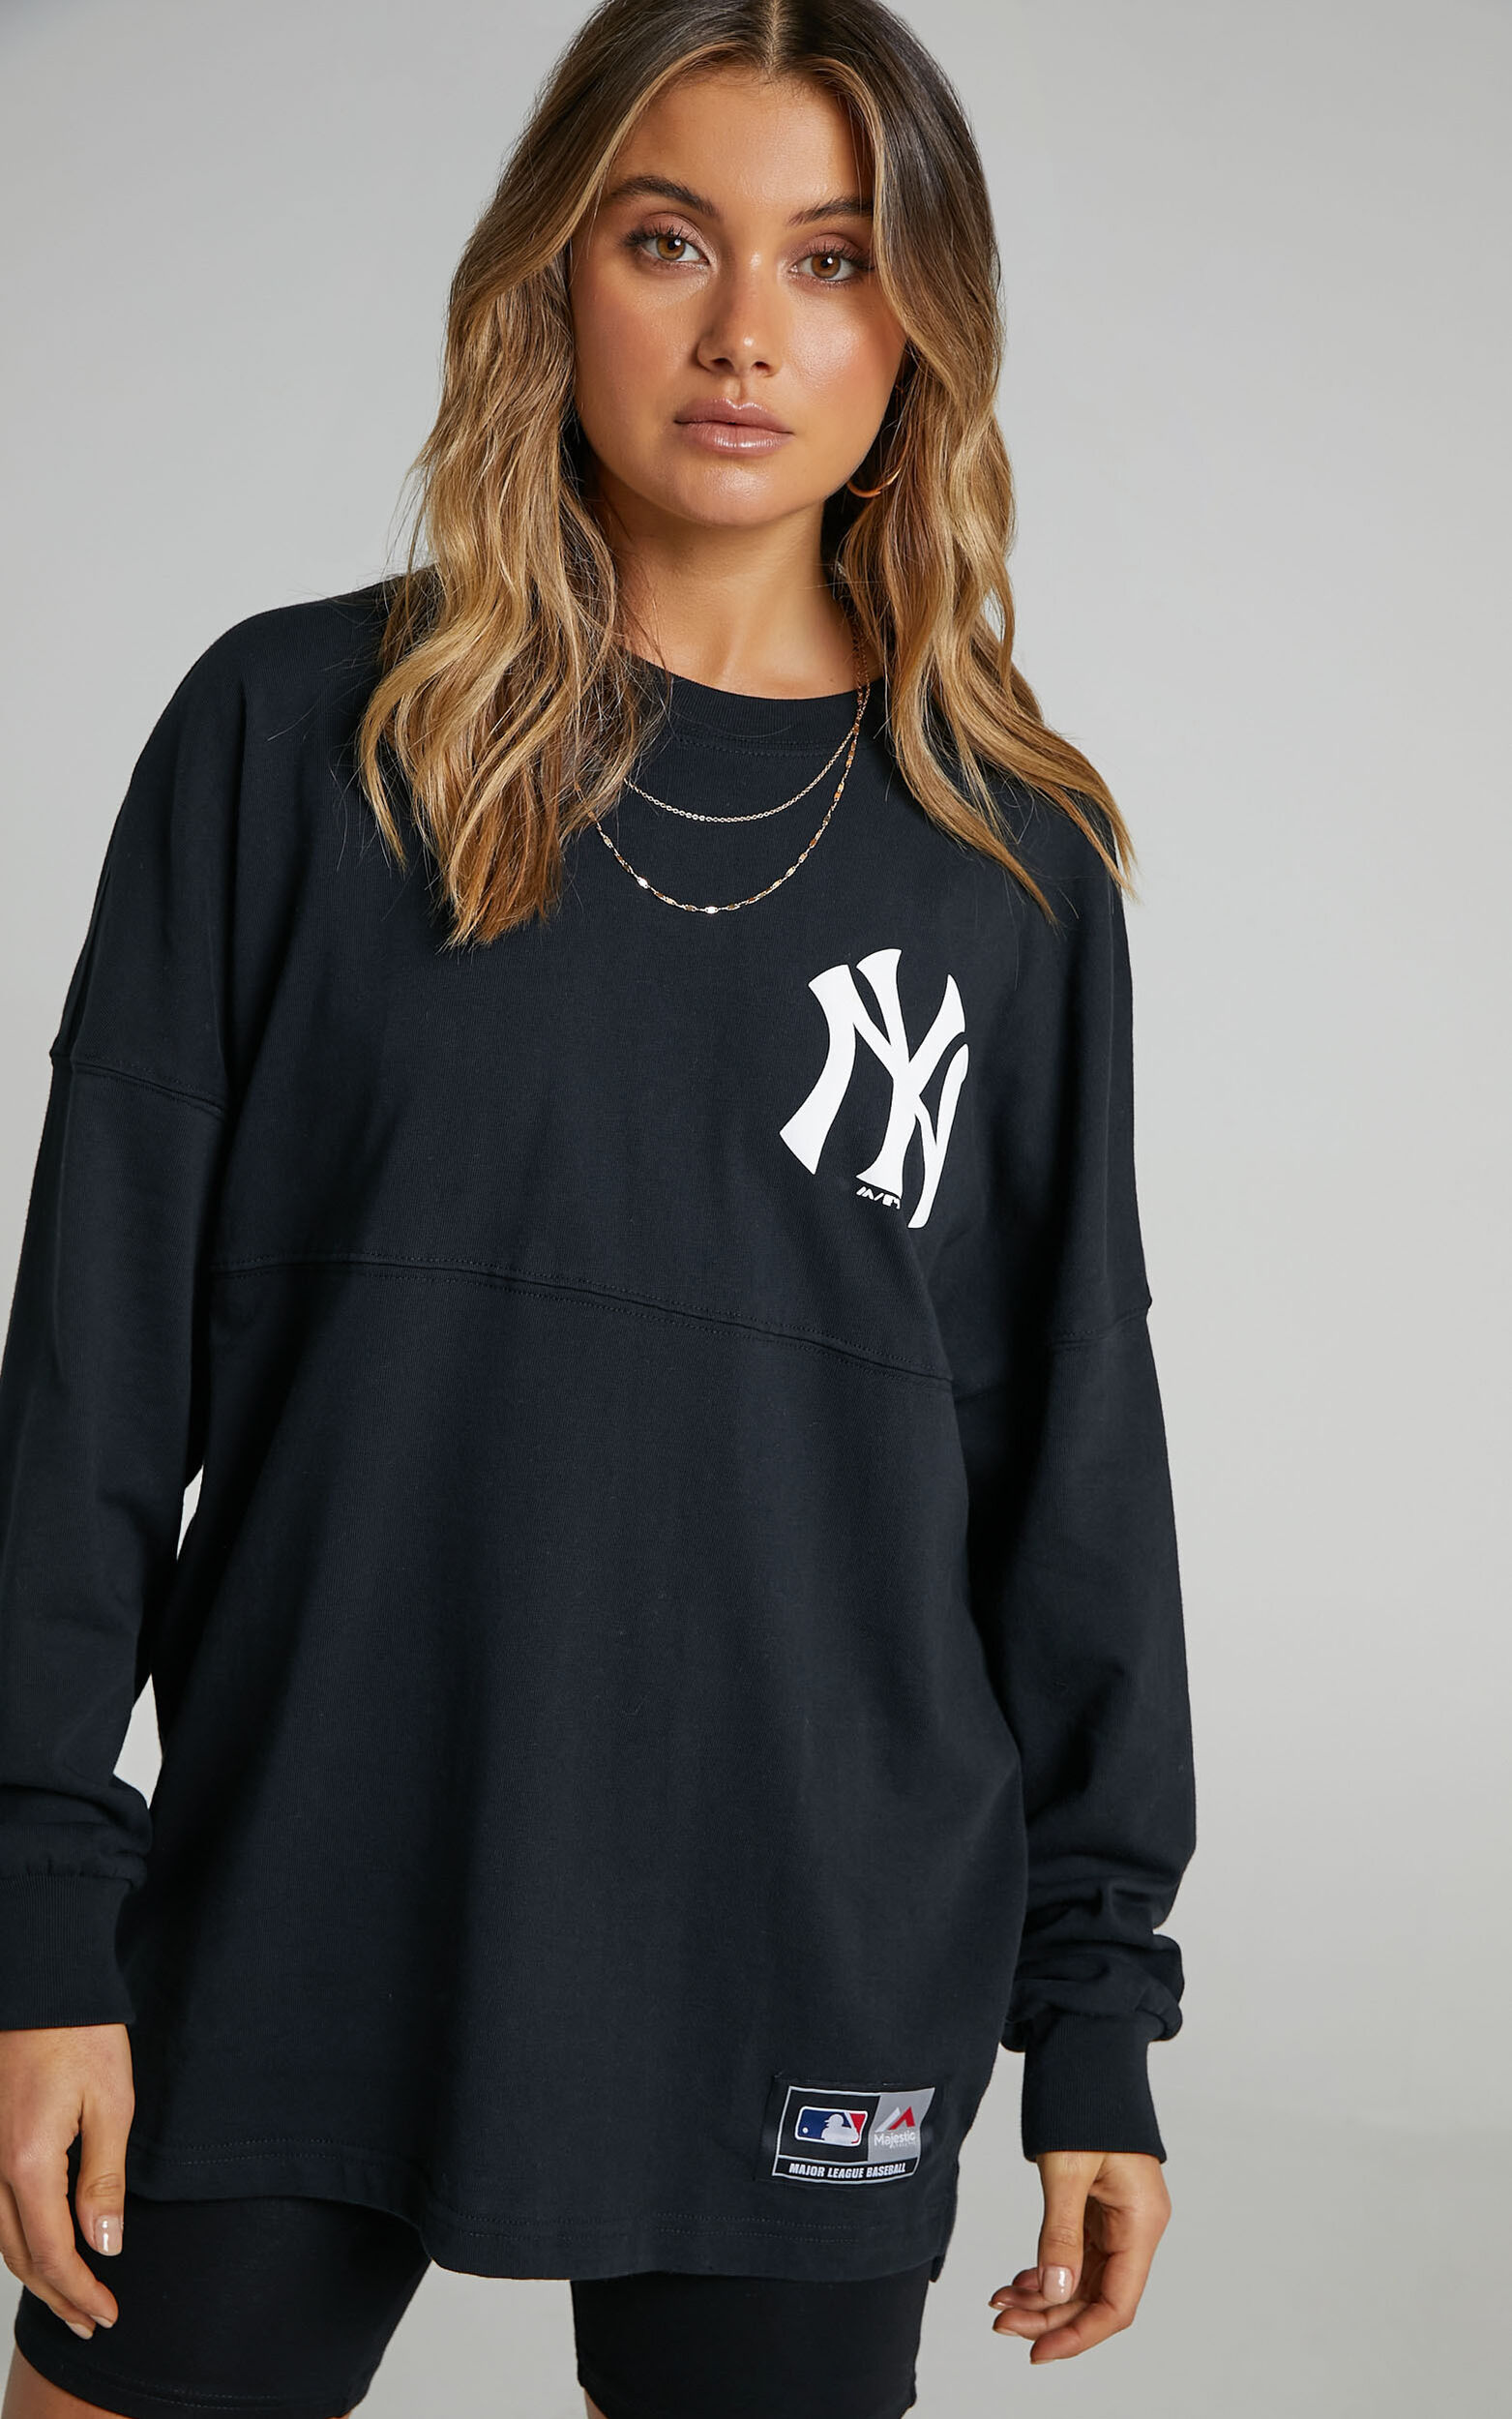 Majestic Yankees Long Sleeve T Shirt With Yankees Sleeve Print To